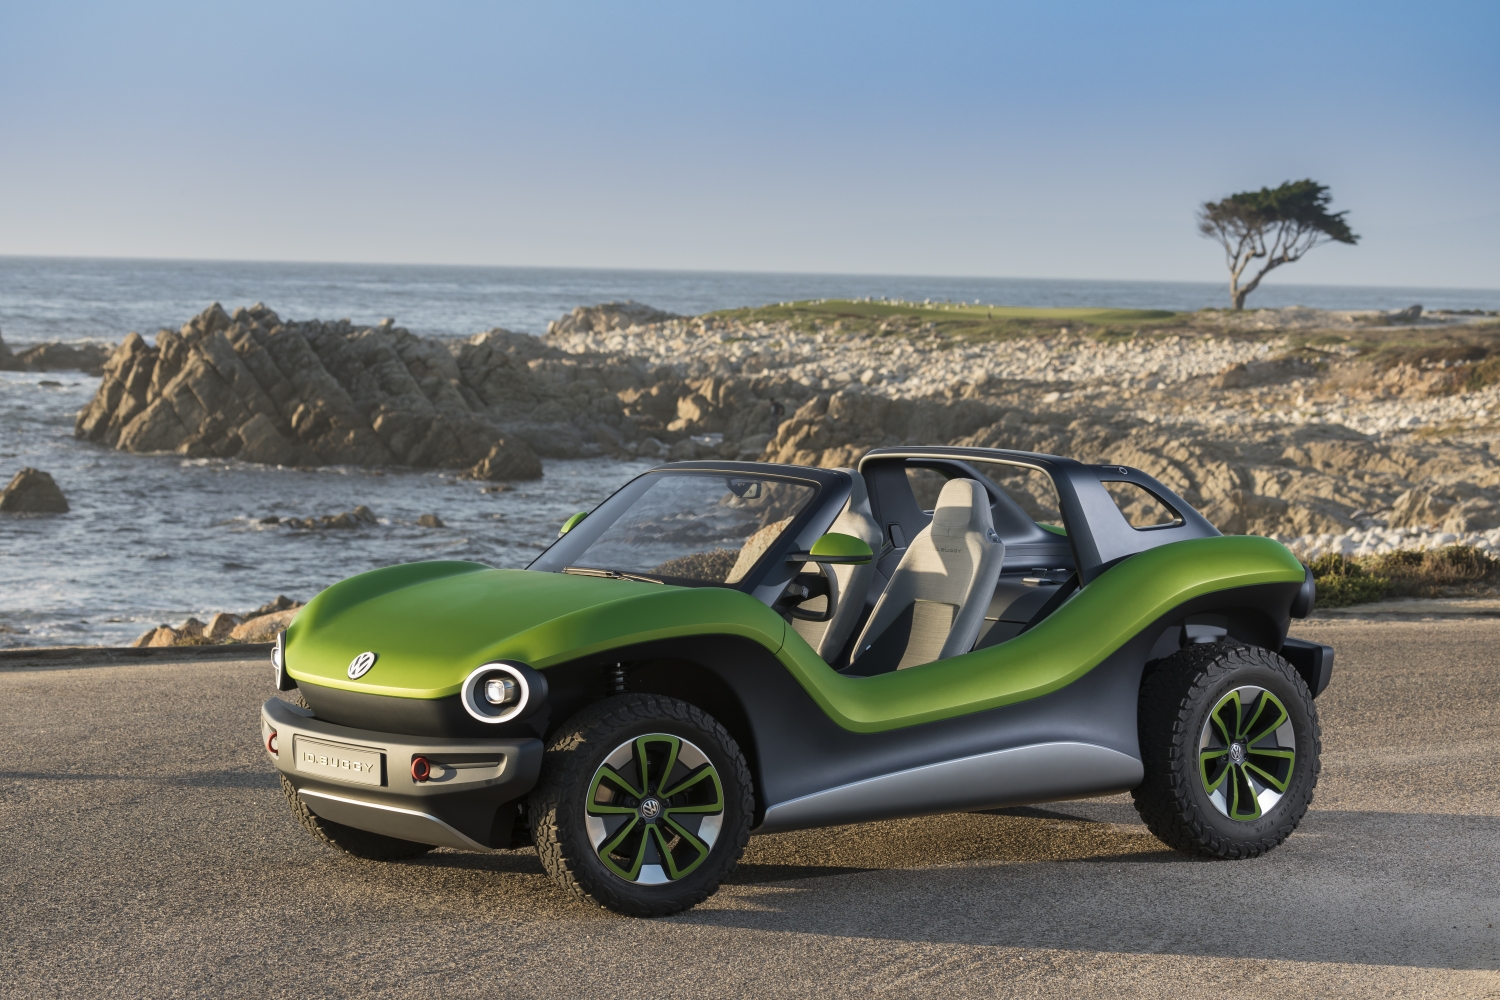 beach to baja dune buggies make news from vw id concept mcqueens manx 11010